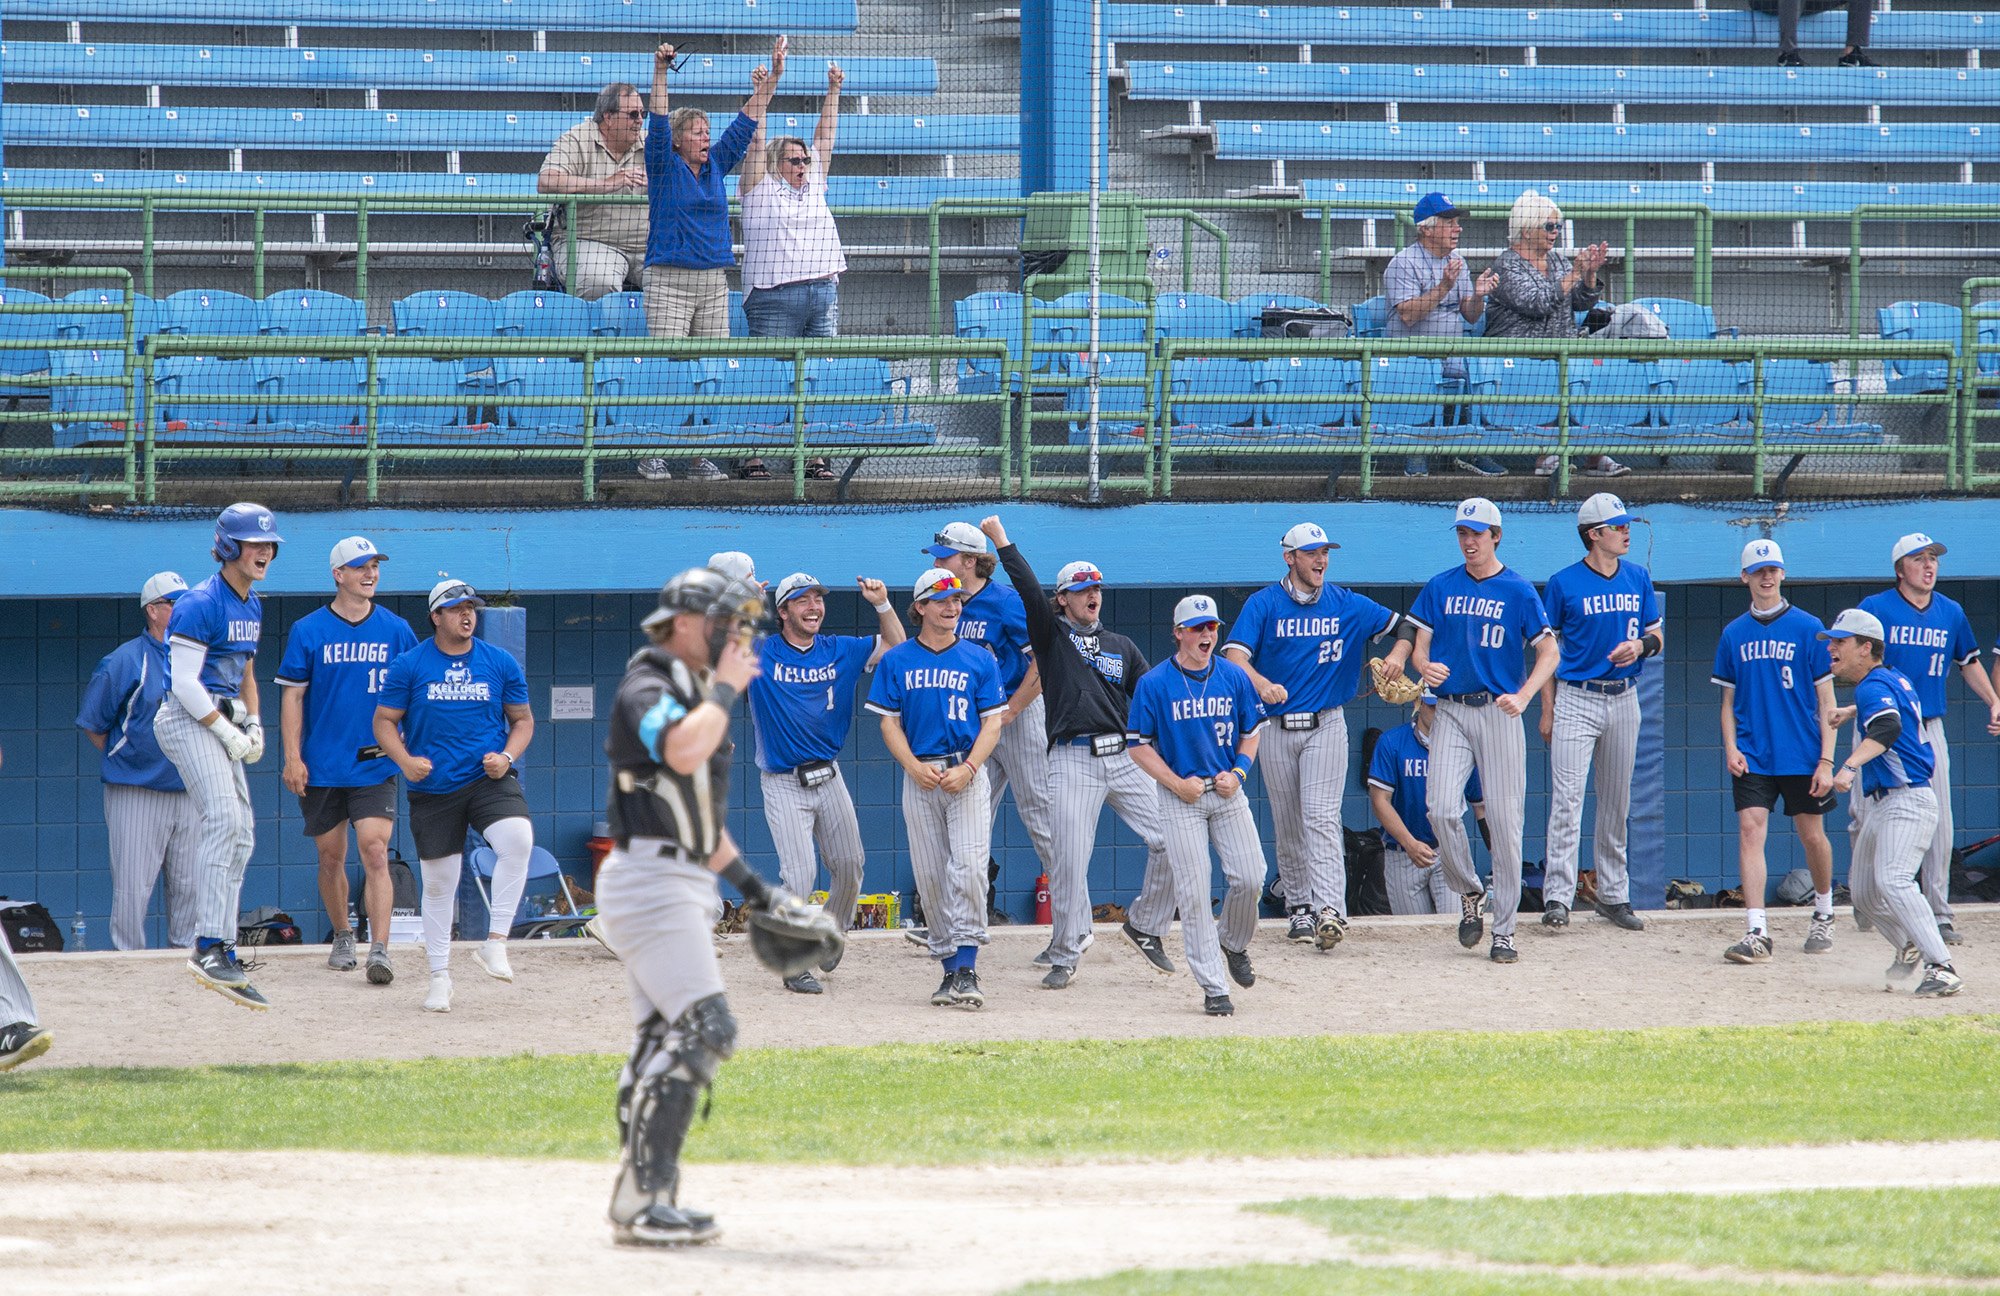 KCC baseball one of the top four teams in the nation after big win in World Series play Tuesday